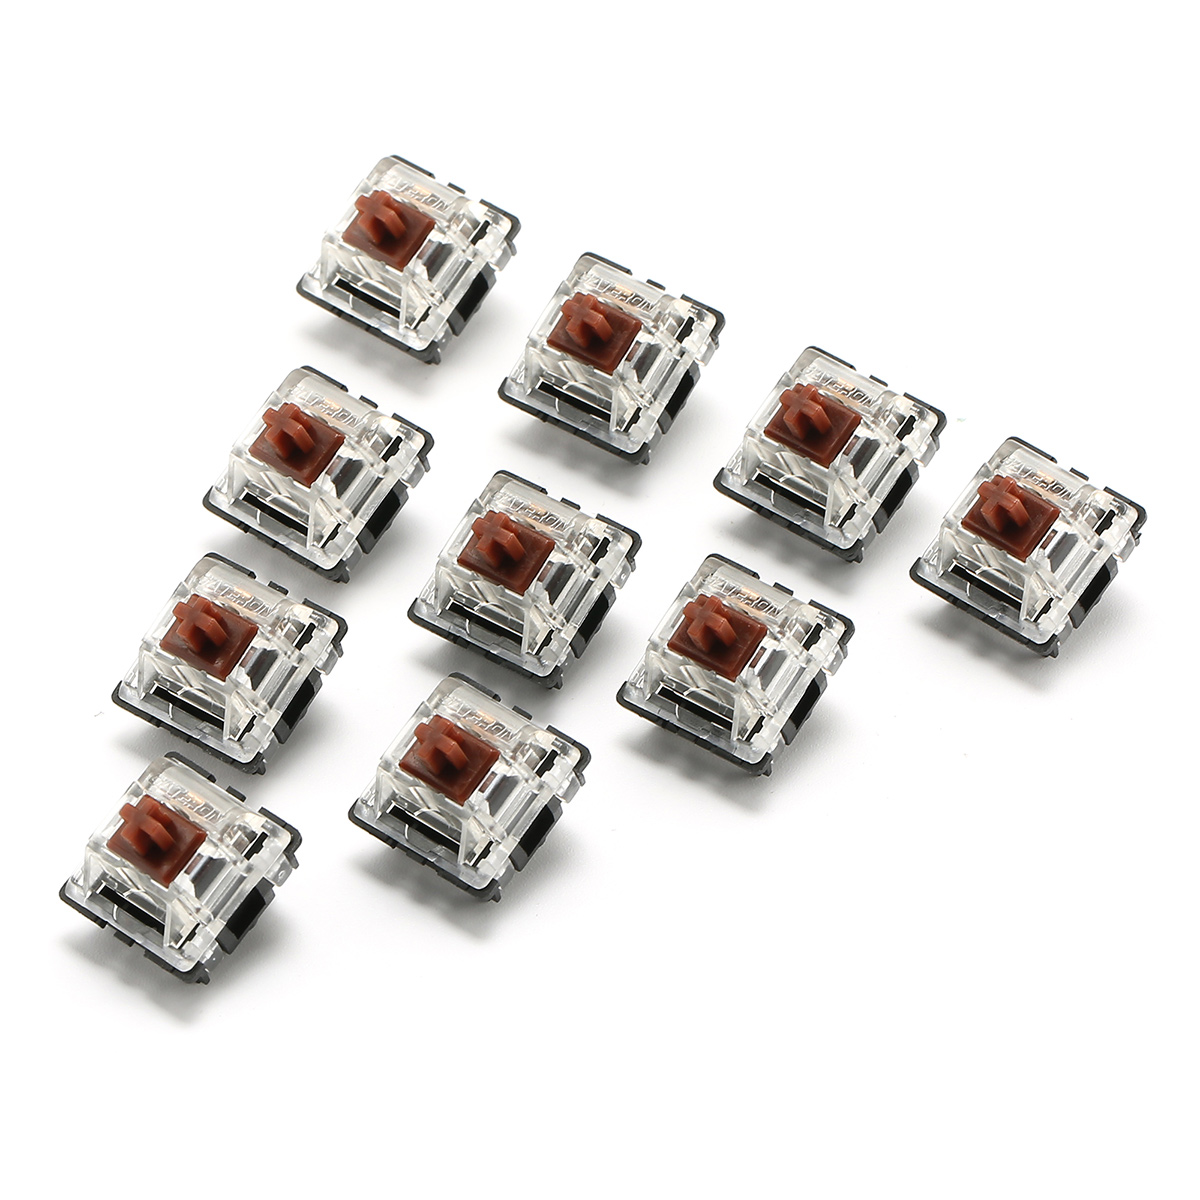 

10PCS 3 Pin Mechanical Keyboard Switch Brown Switch for Gateron Keyboard Replacement